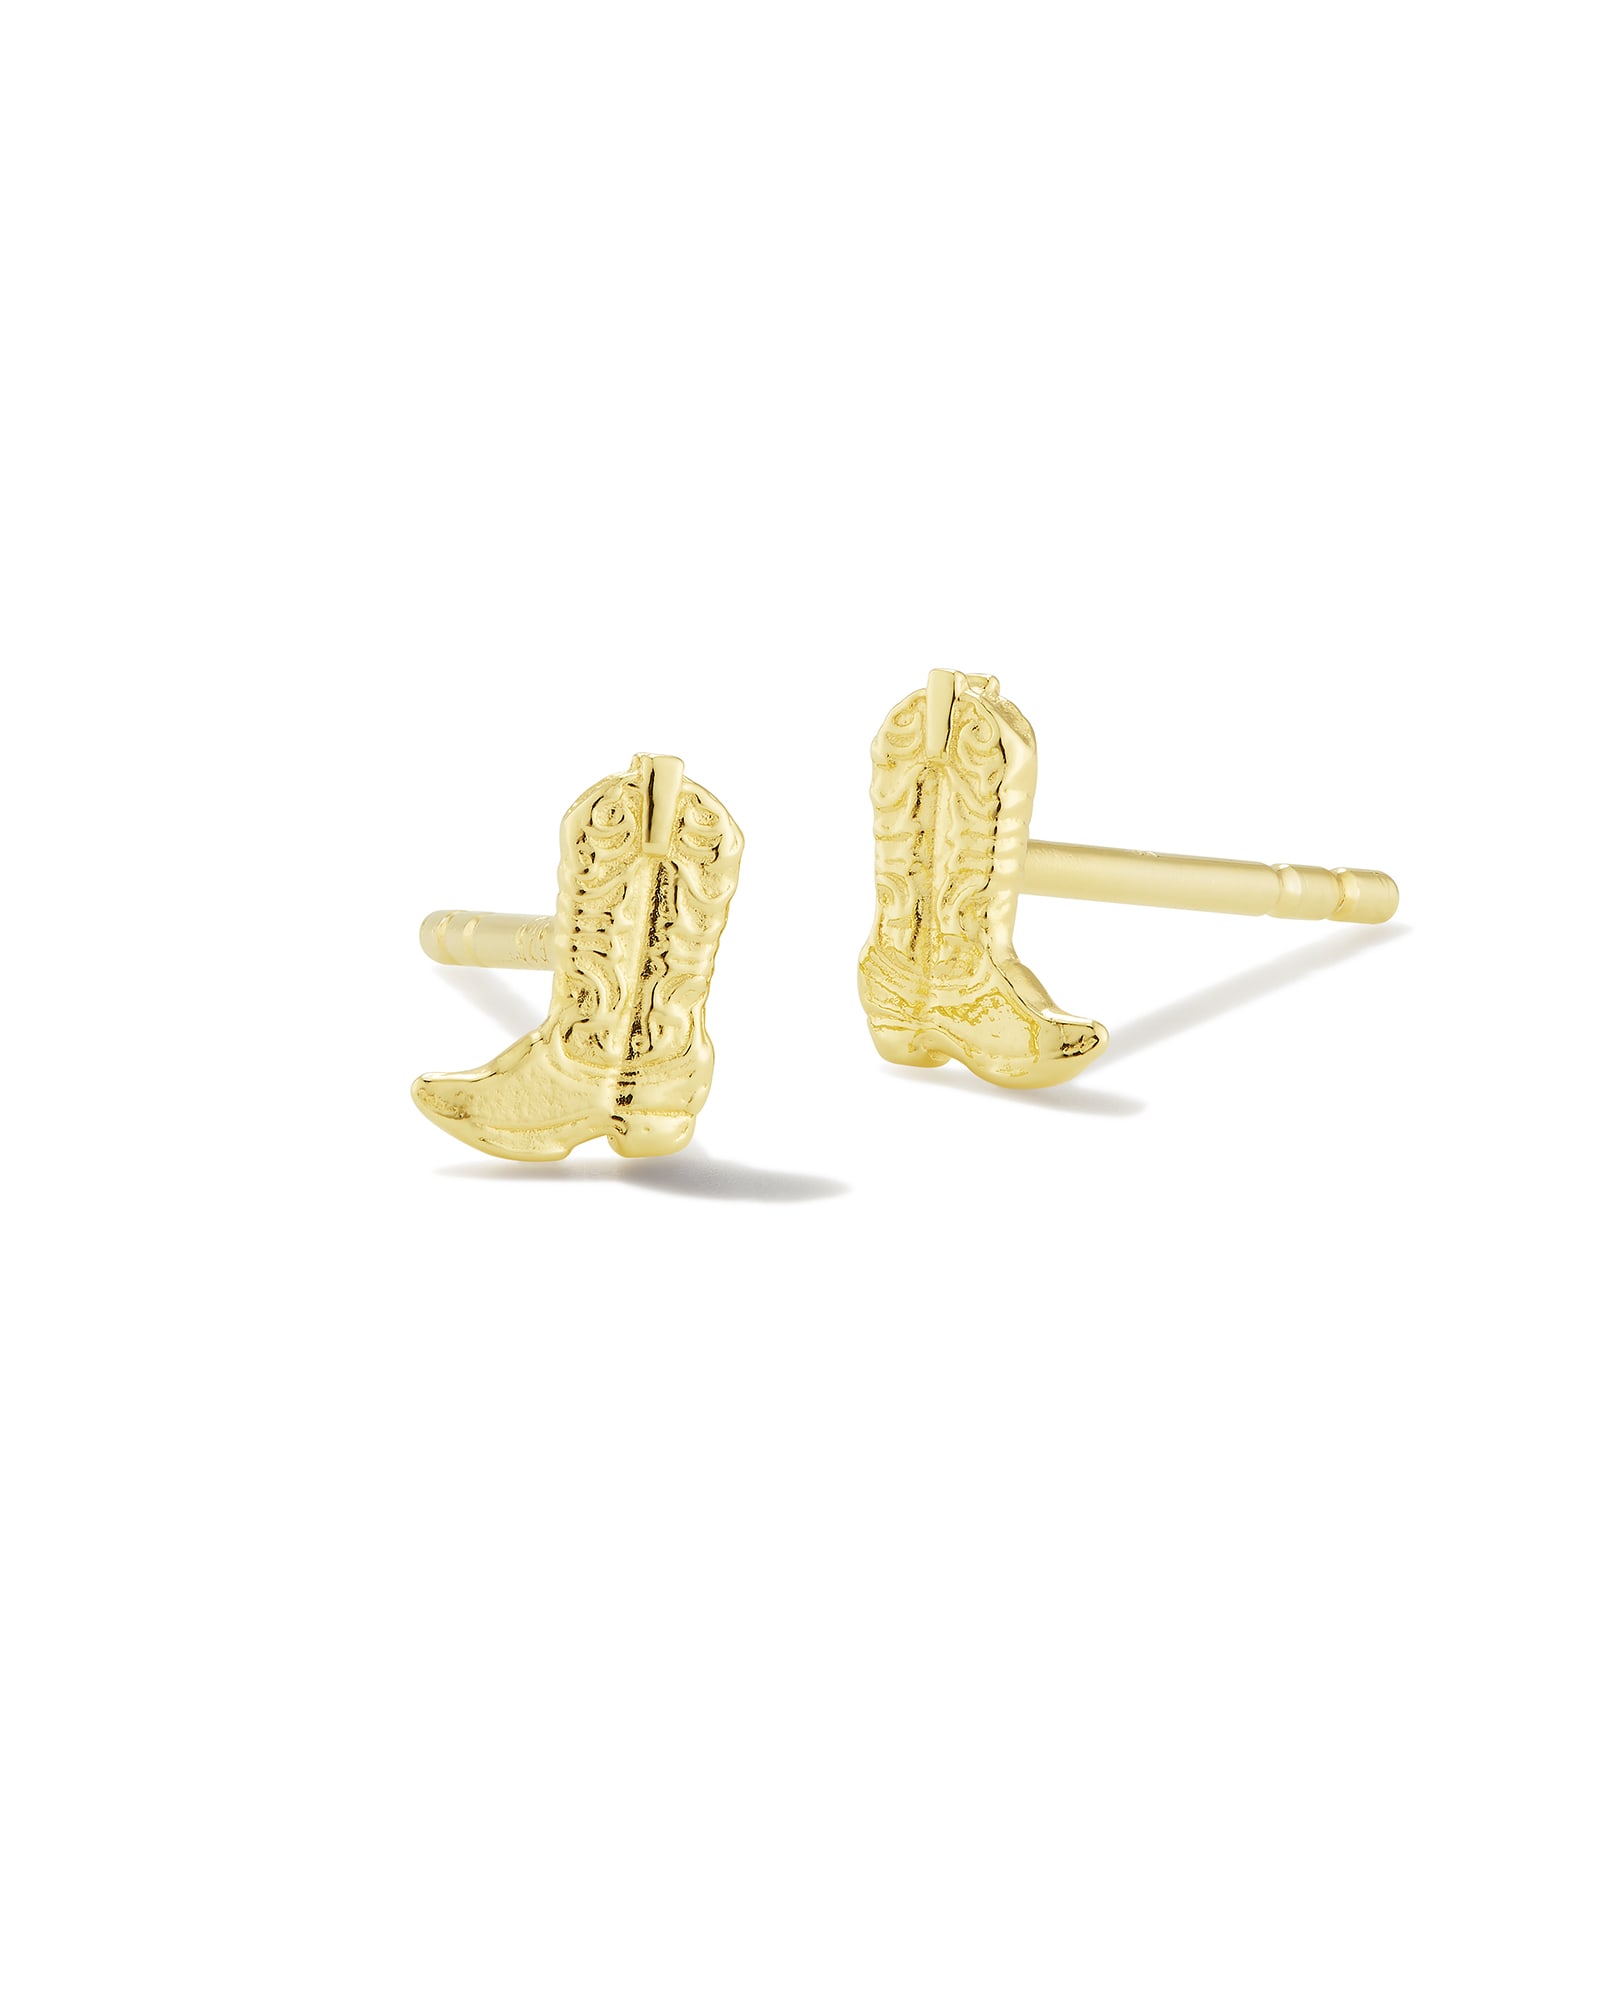 Tiny Cowboy Boot Stud Earrings in 18k Yellow Gold Vermeil